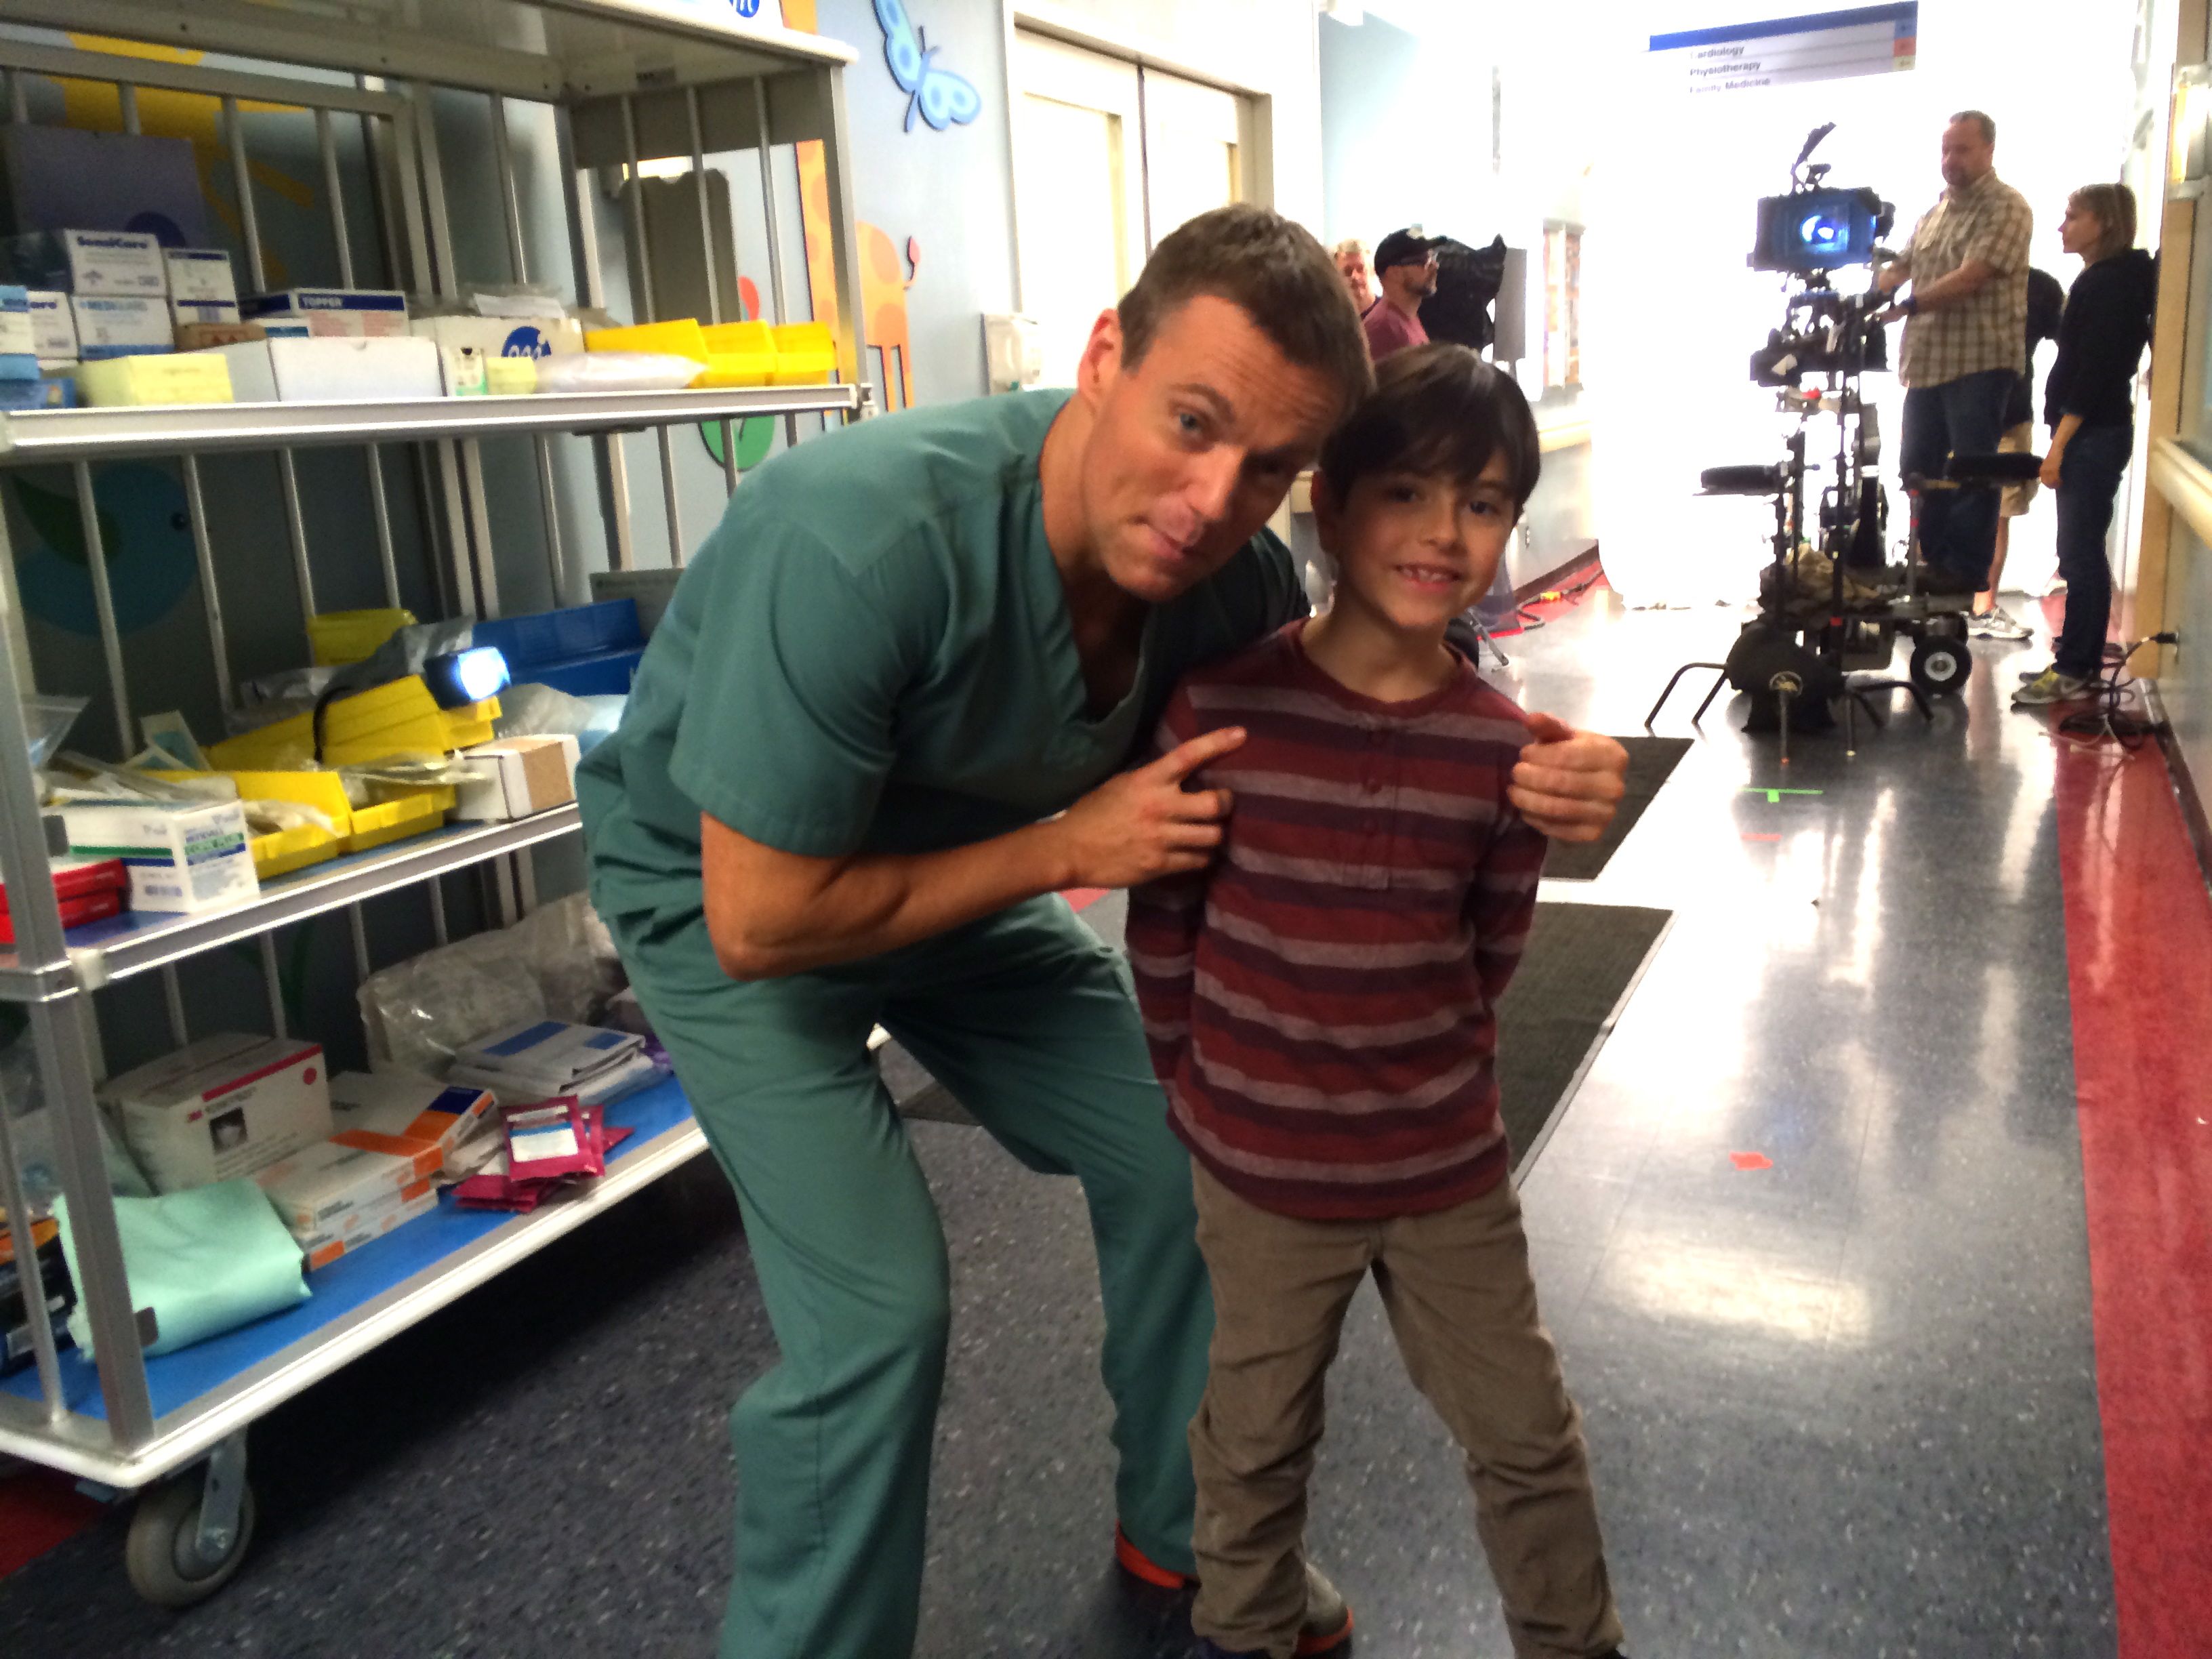 On the set of Saving Hope with Michael Shanks